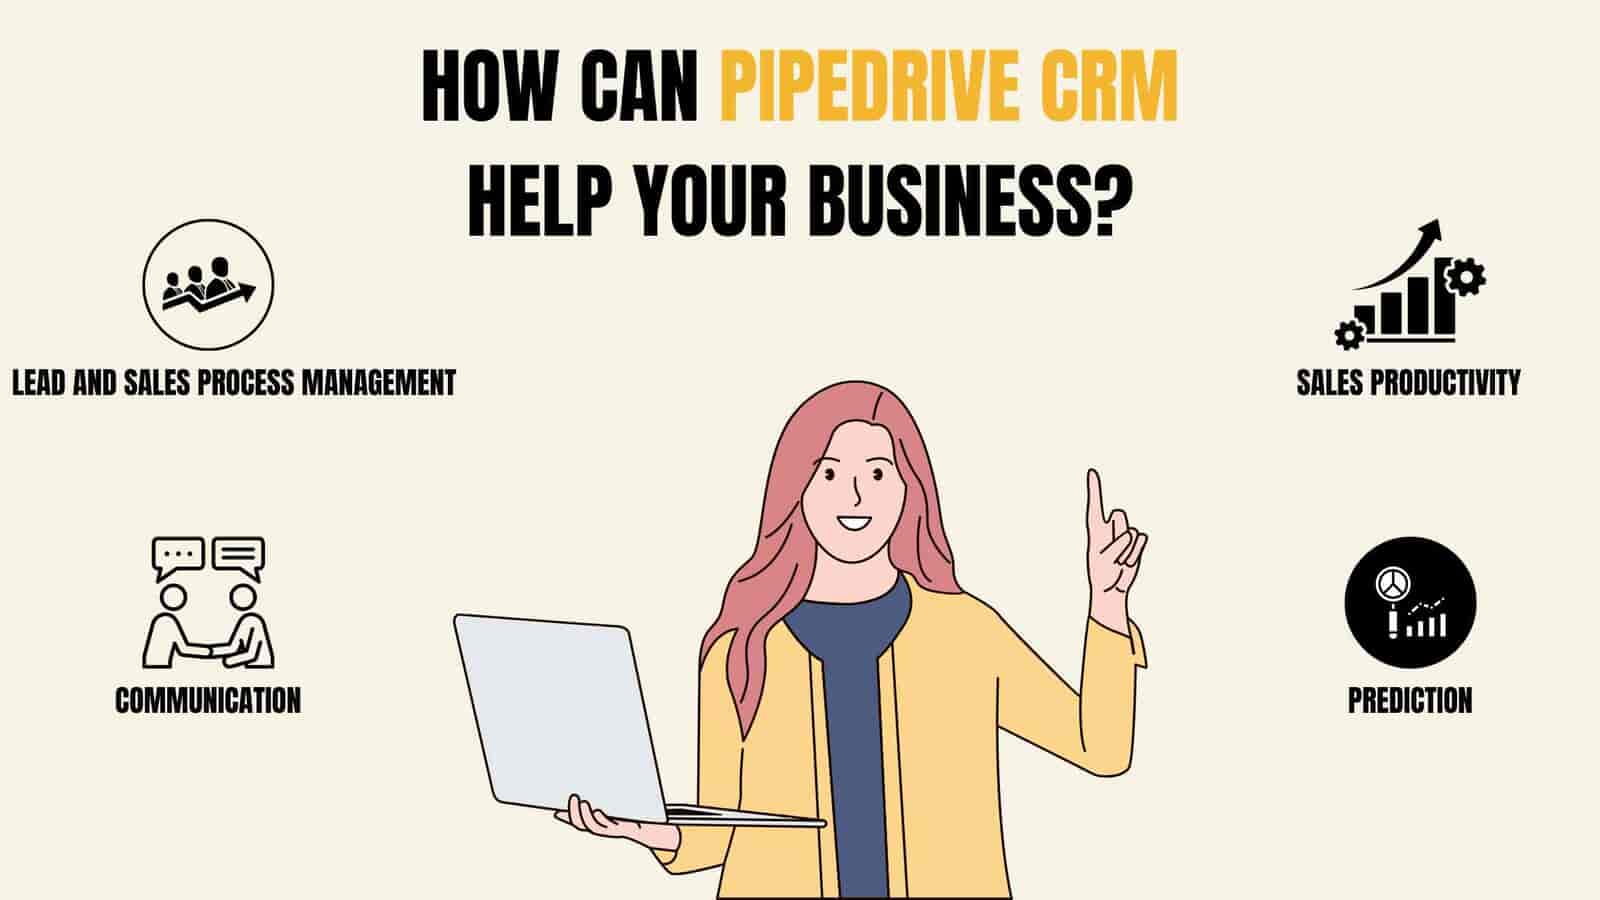 How can Pipedrive CRM help you business?